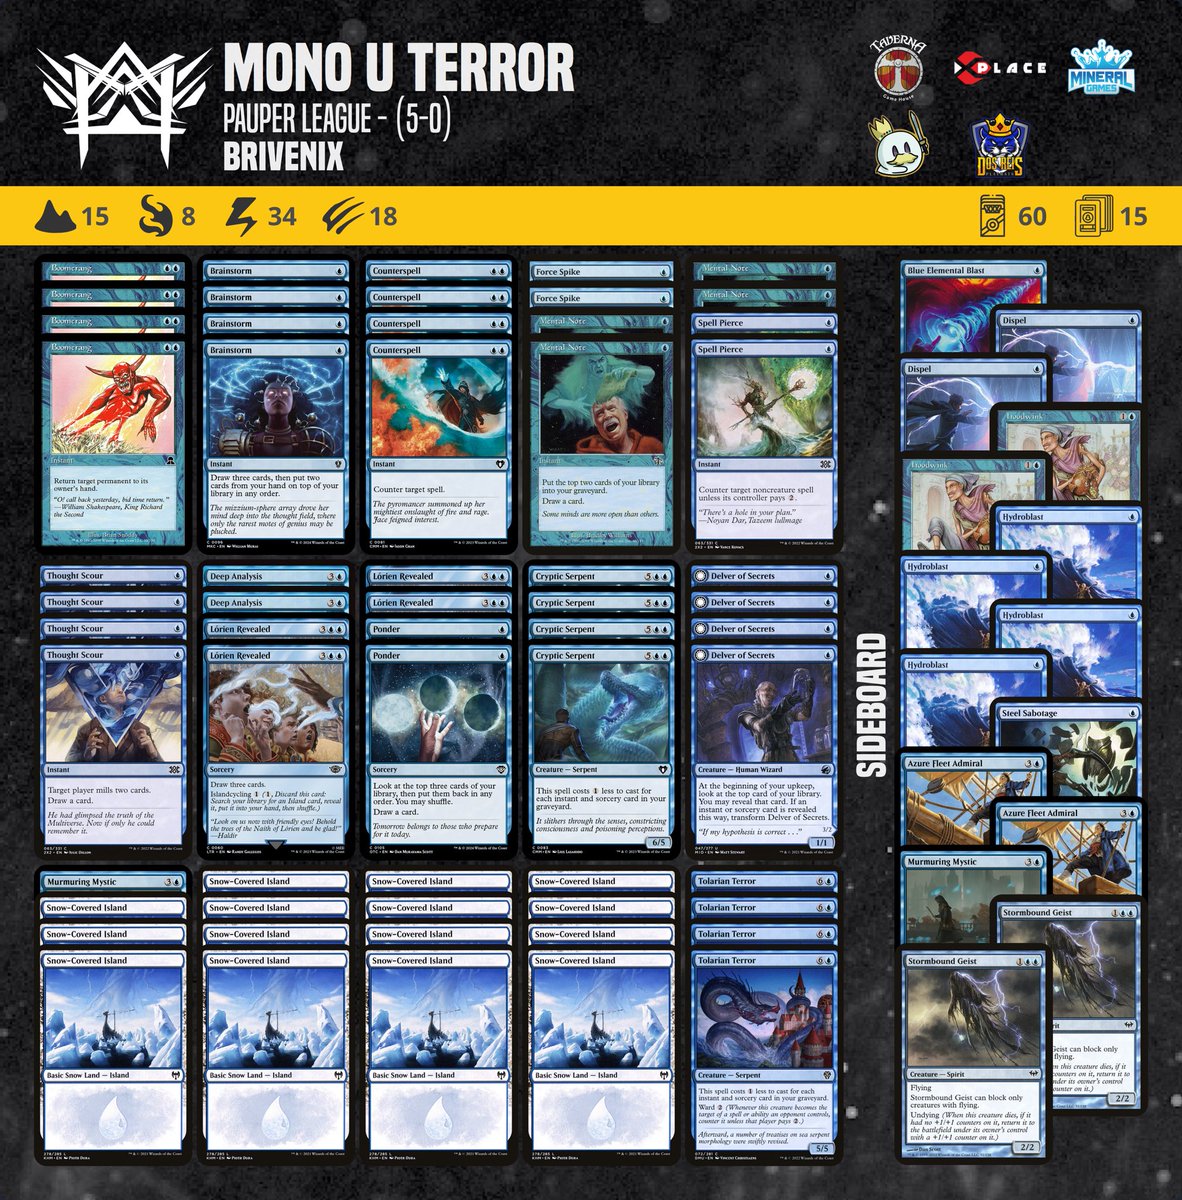 Our athlete Brivenix achieved a 5-0 record in the Pauper League tournament with this Mono U Terror deck list.

#pauper  #magic #mtgcommon #metagamepauper #mtgpauper #magicthegathering #wizardsofthecoast 

@PauperDecklists @fireshoes